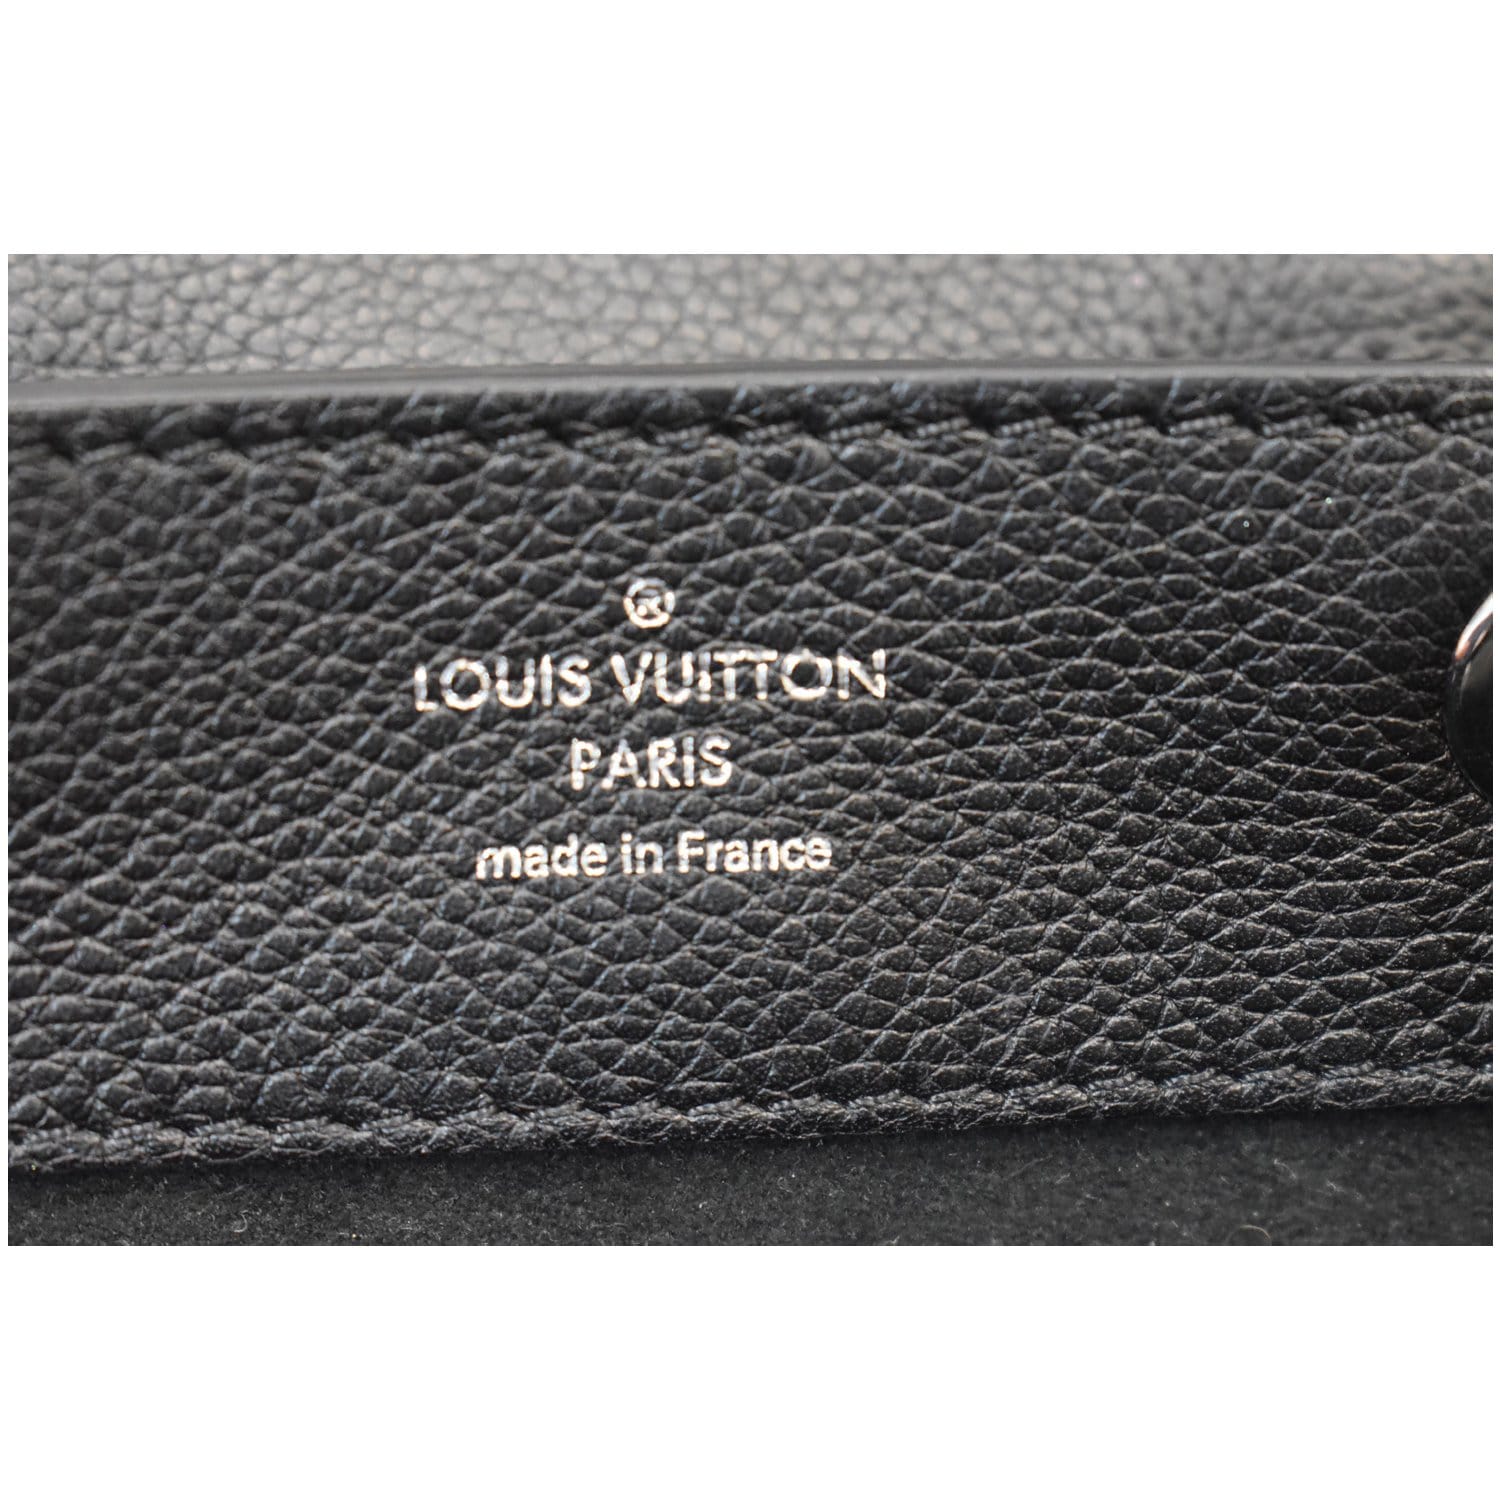 Louis Vuitton Backpack Comet Black Borealis in Calfskin Leather